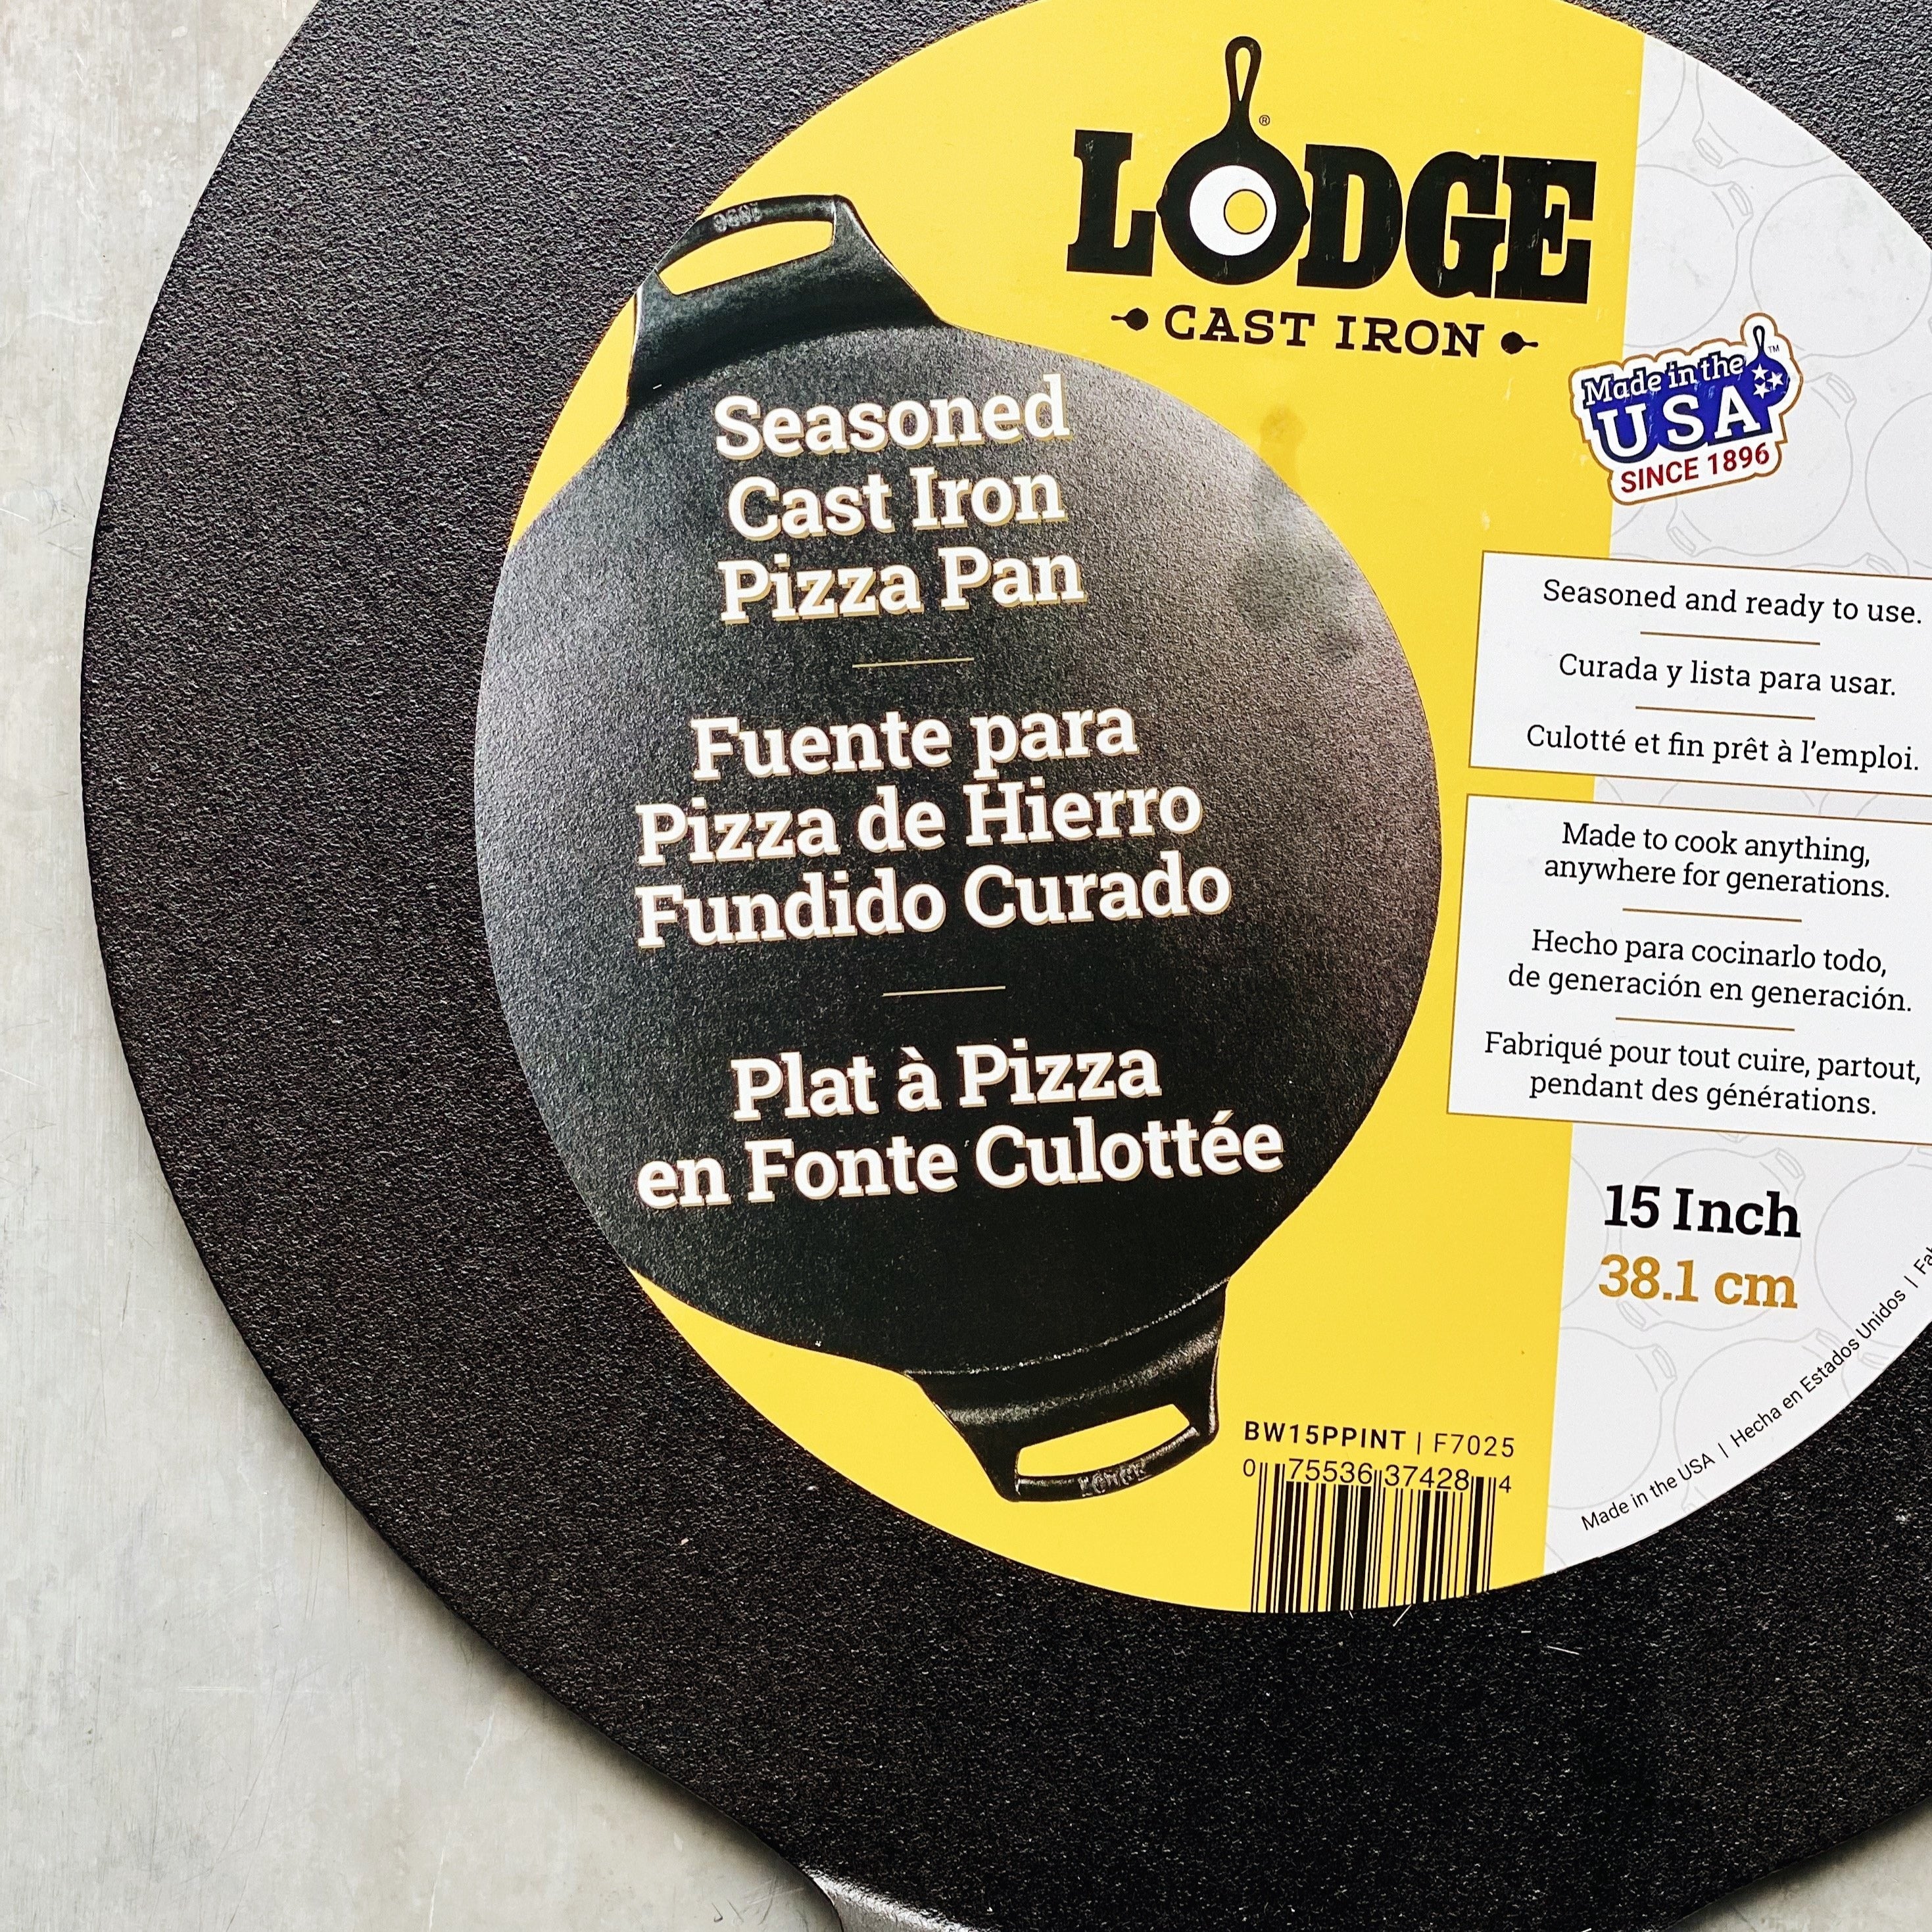 Cast Iron Pizza Pan 15 inch • Your Guide to American Made Products